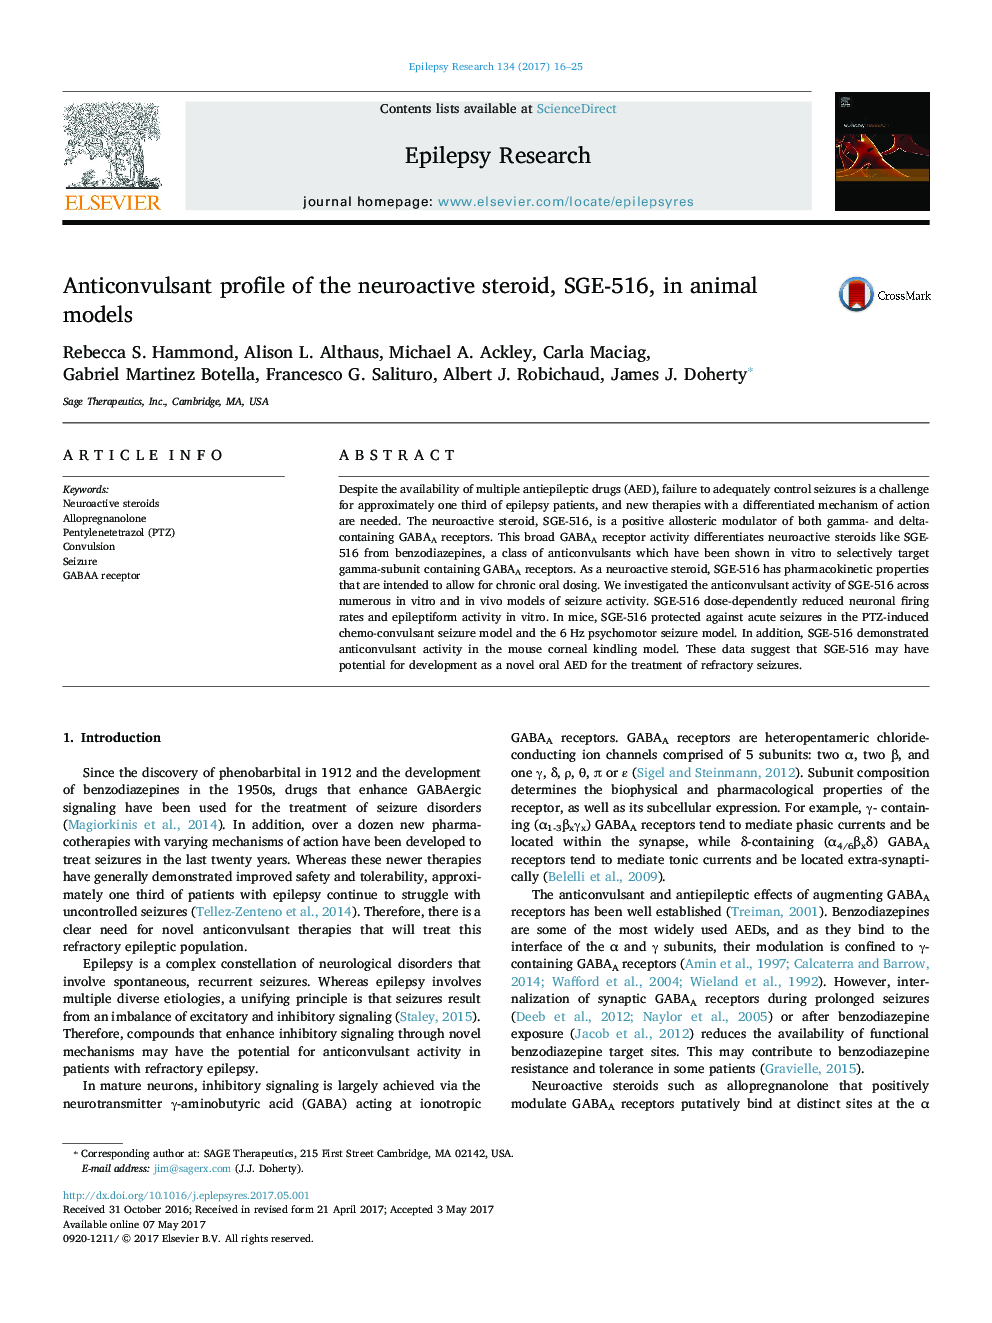 Anticonvulsant profile of the neuroactive steroid, SGE-516, in animal models